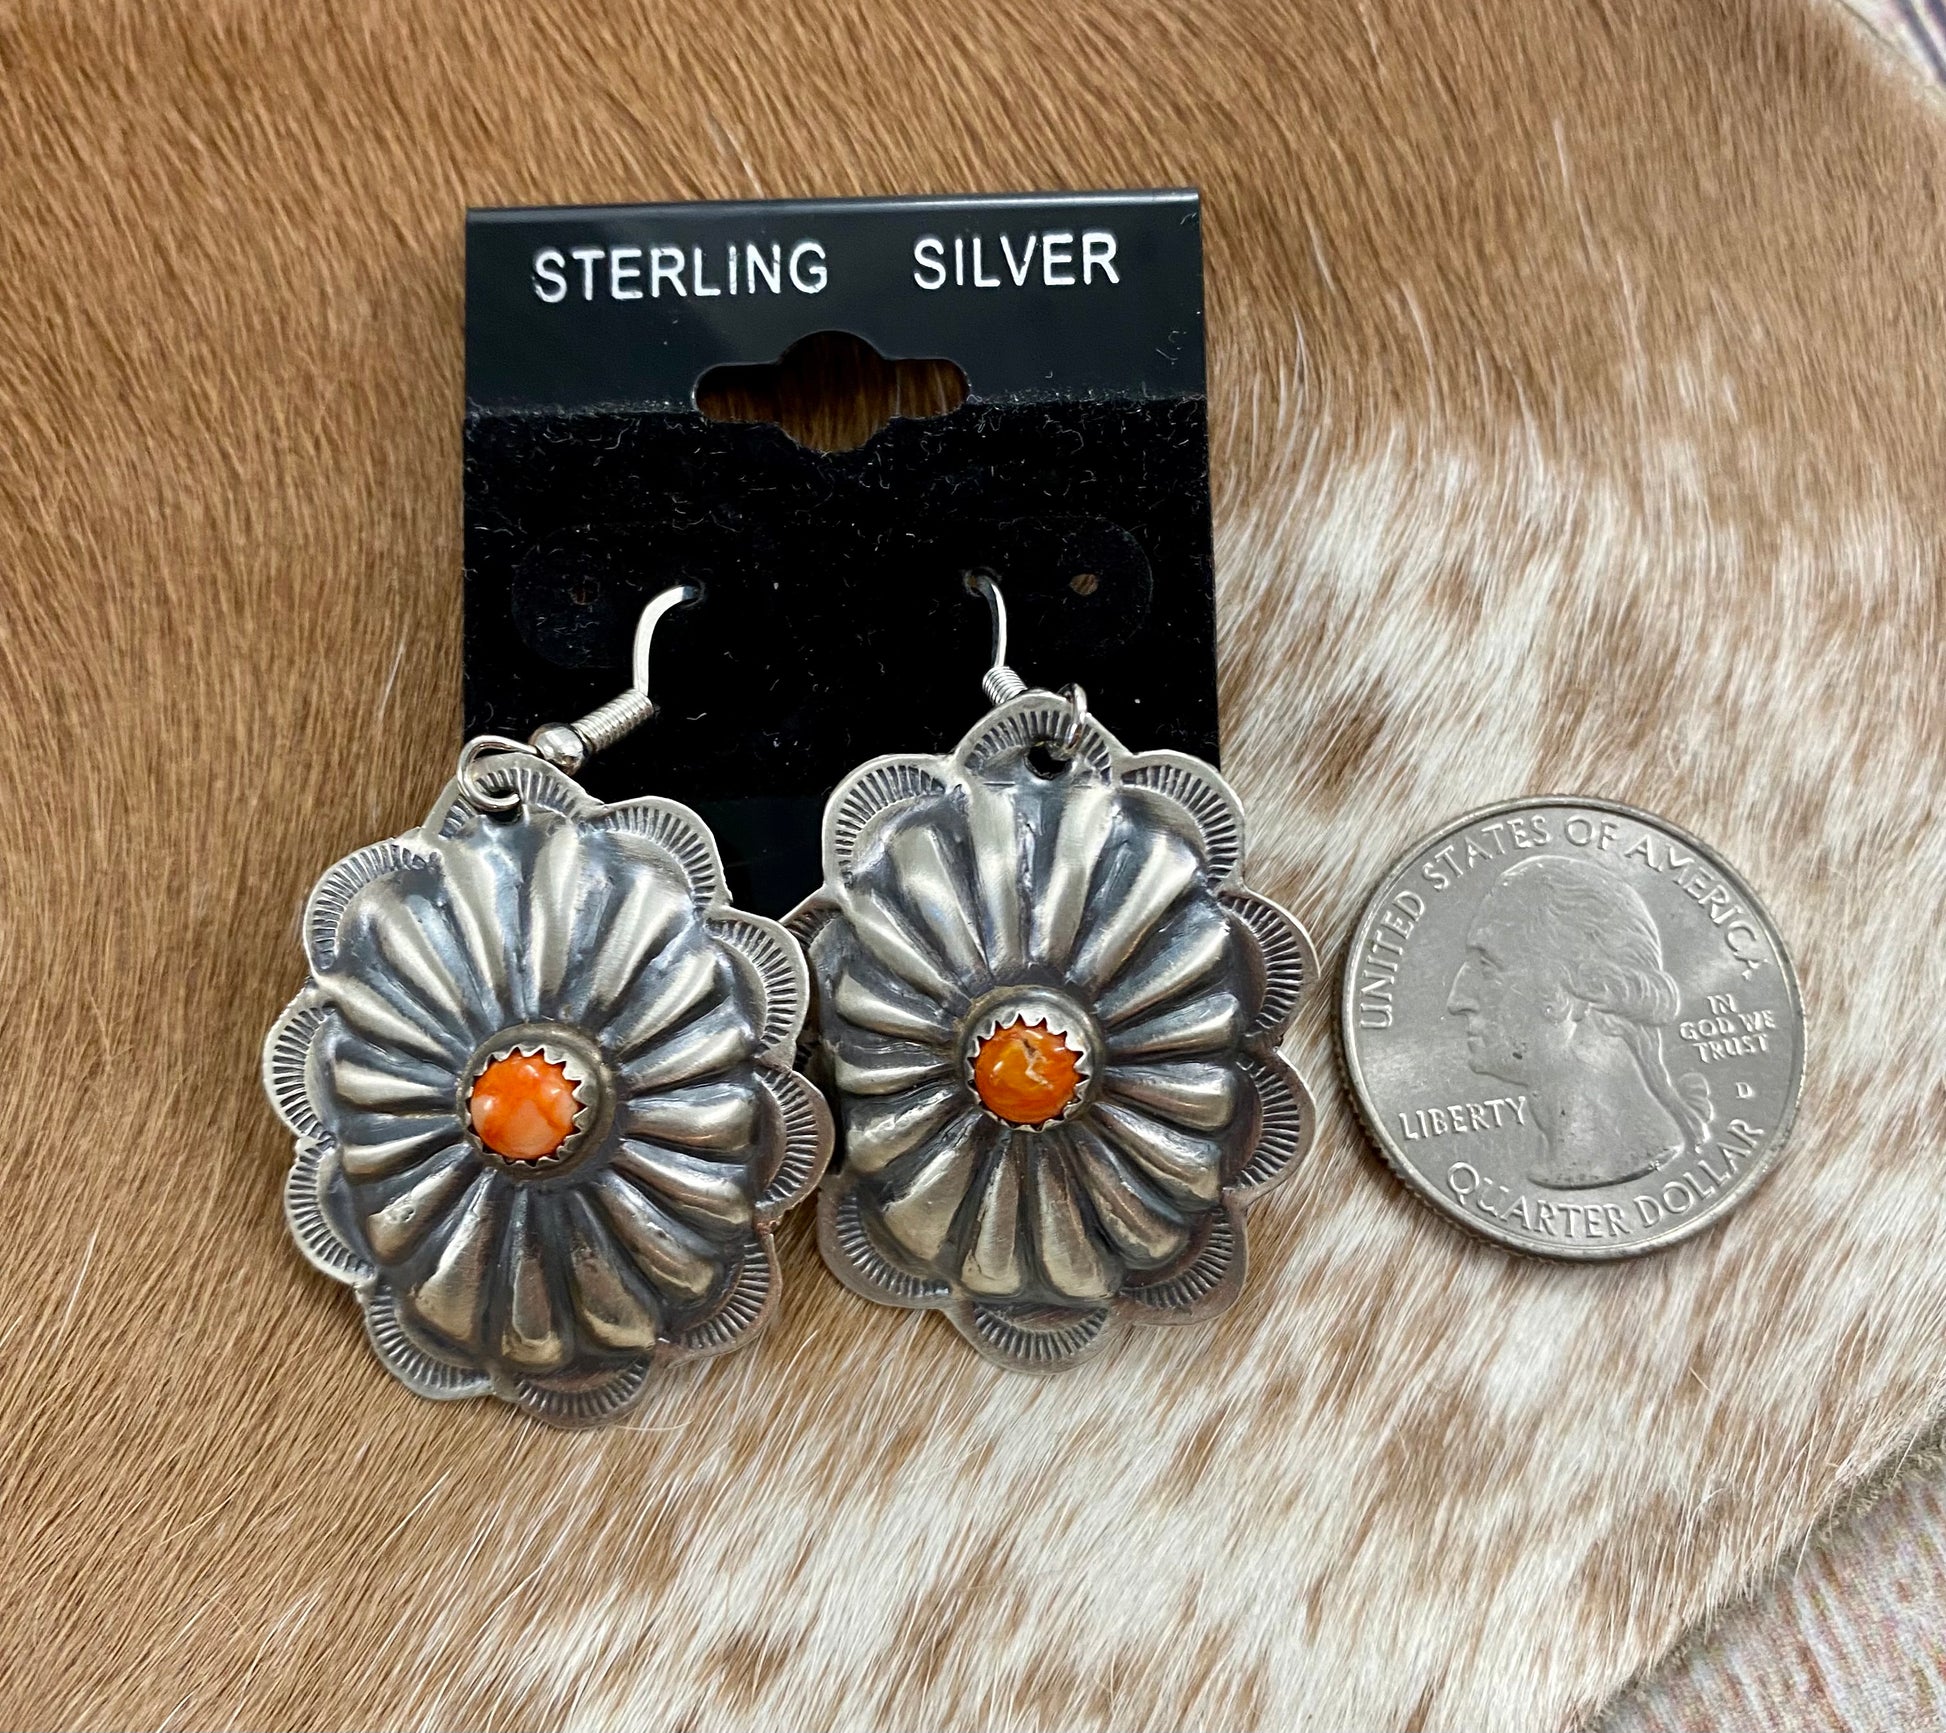 earrings placed next to quarter